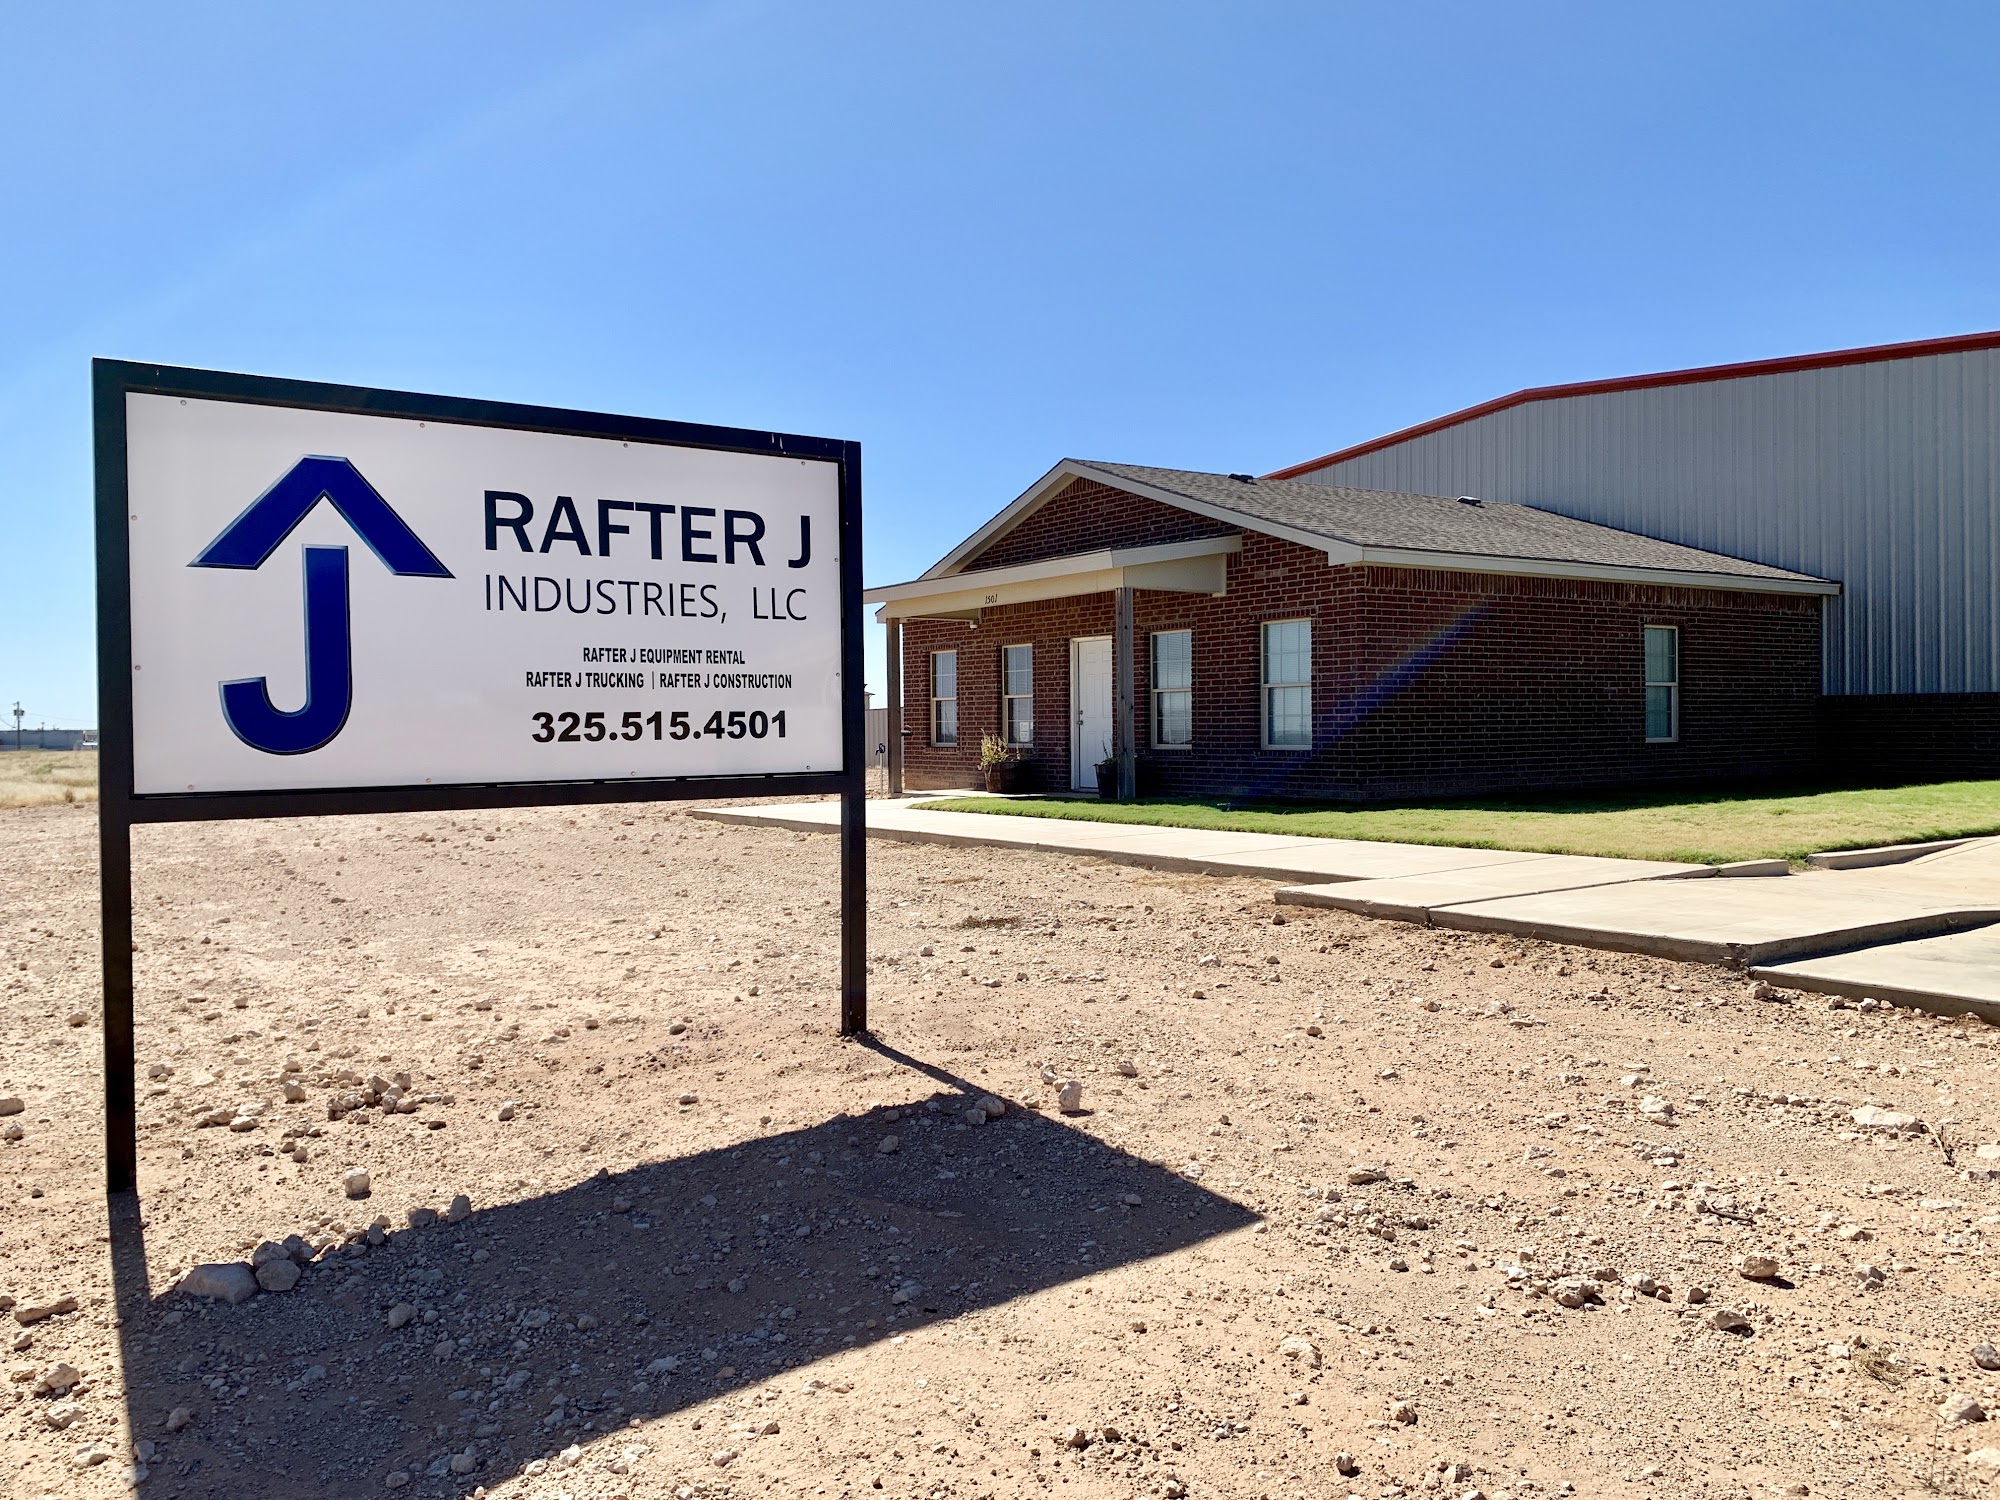 Rafter J Industries, LLC 510 Old Post Rd, Snyder Texas 79549